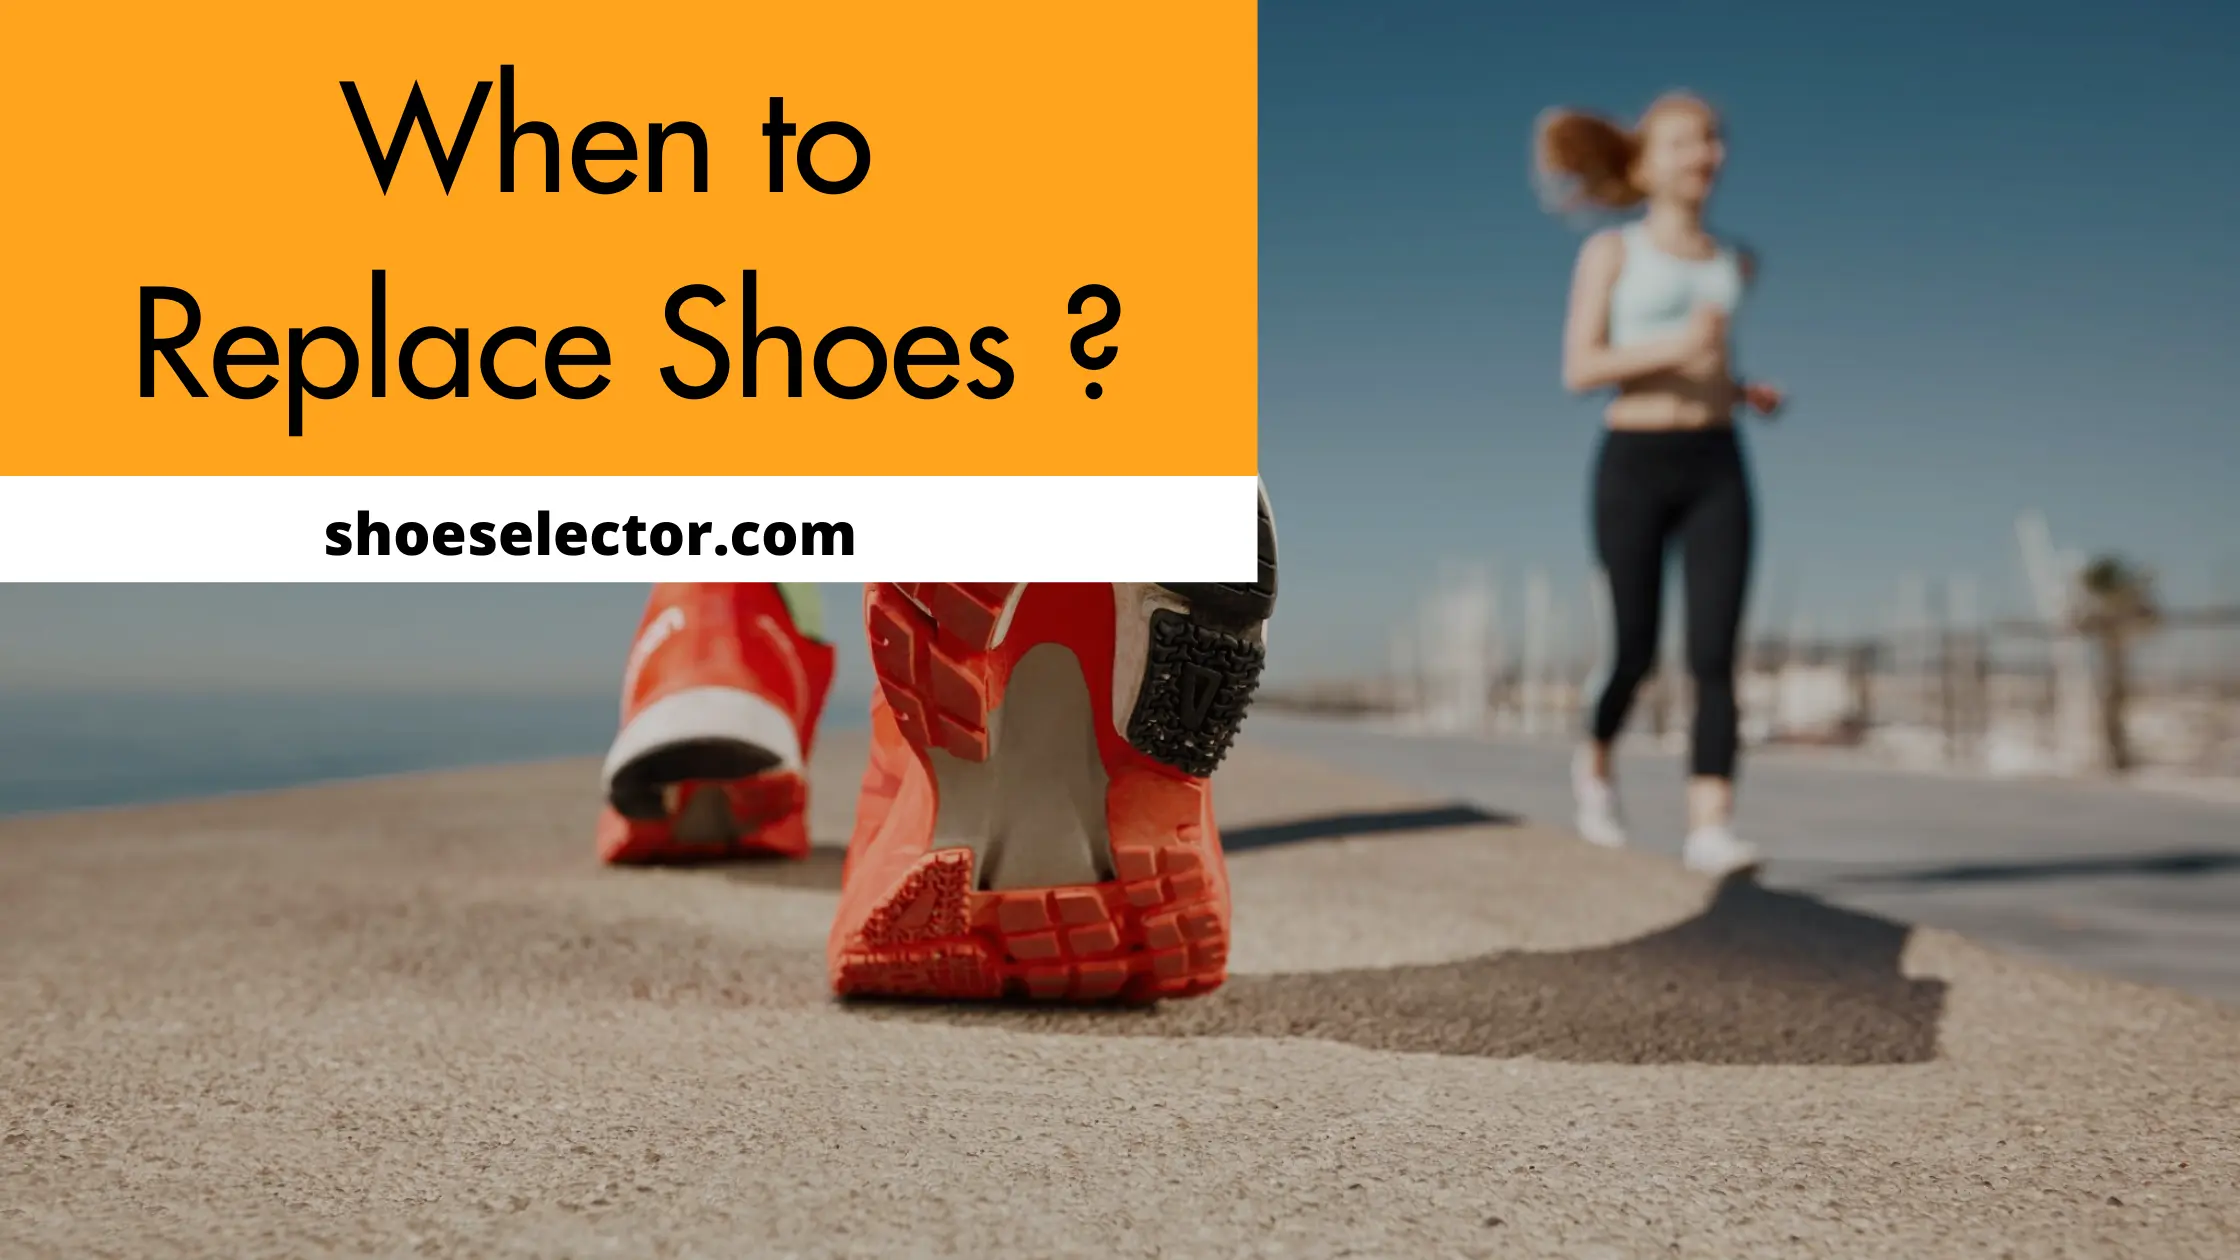 When To Replace Shoes? - Easy Guide